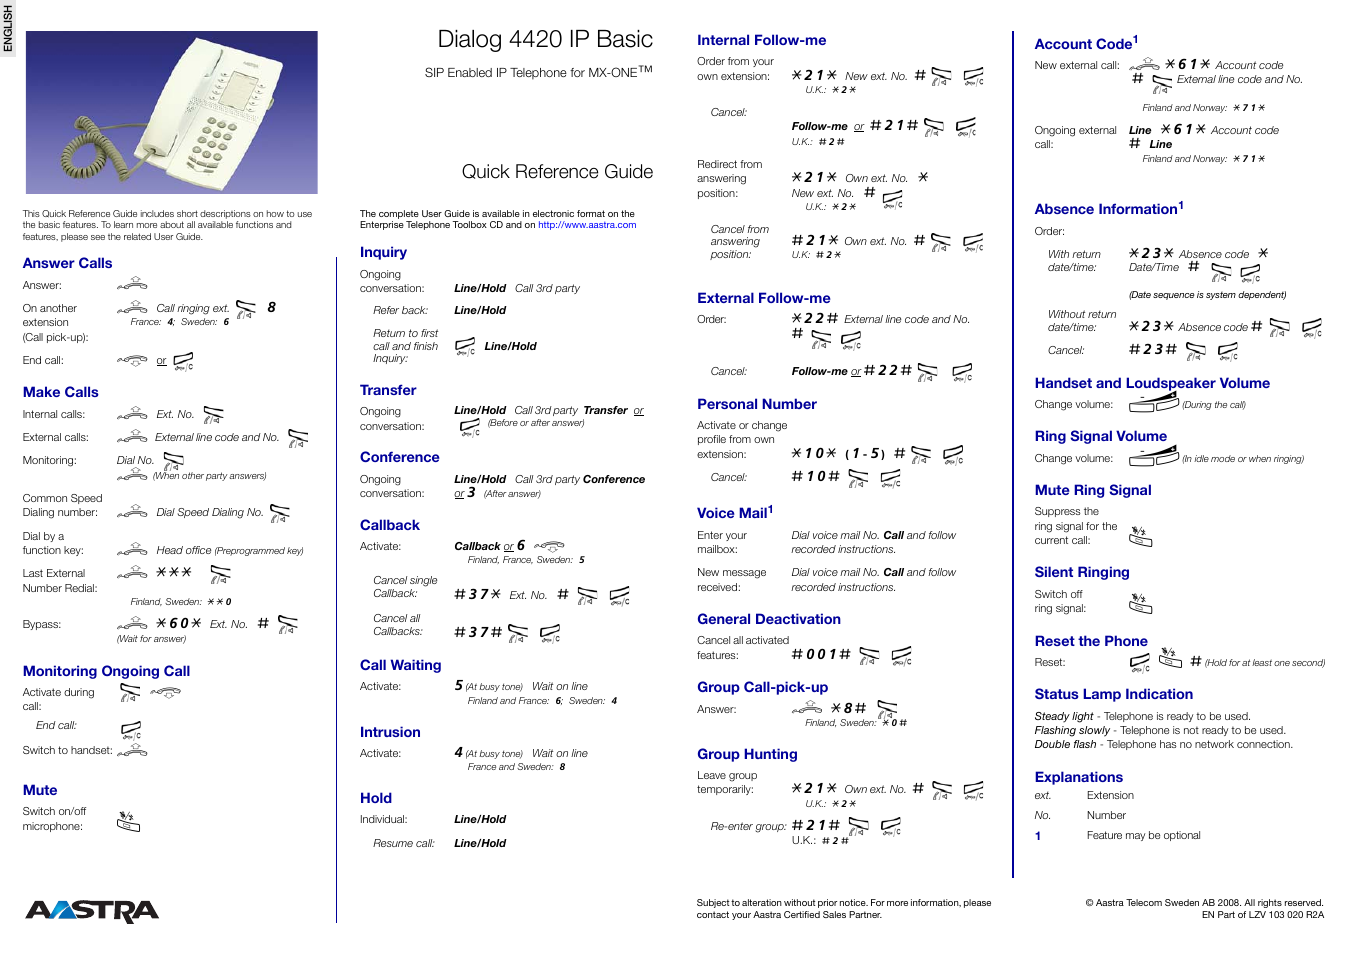 4420 IP Basic (SIP) for MX-ONE Quick Reference Guide